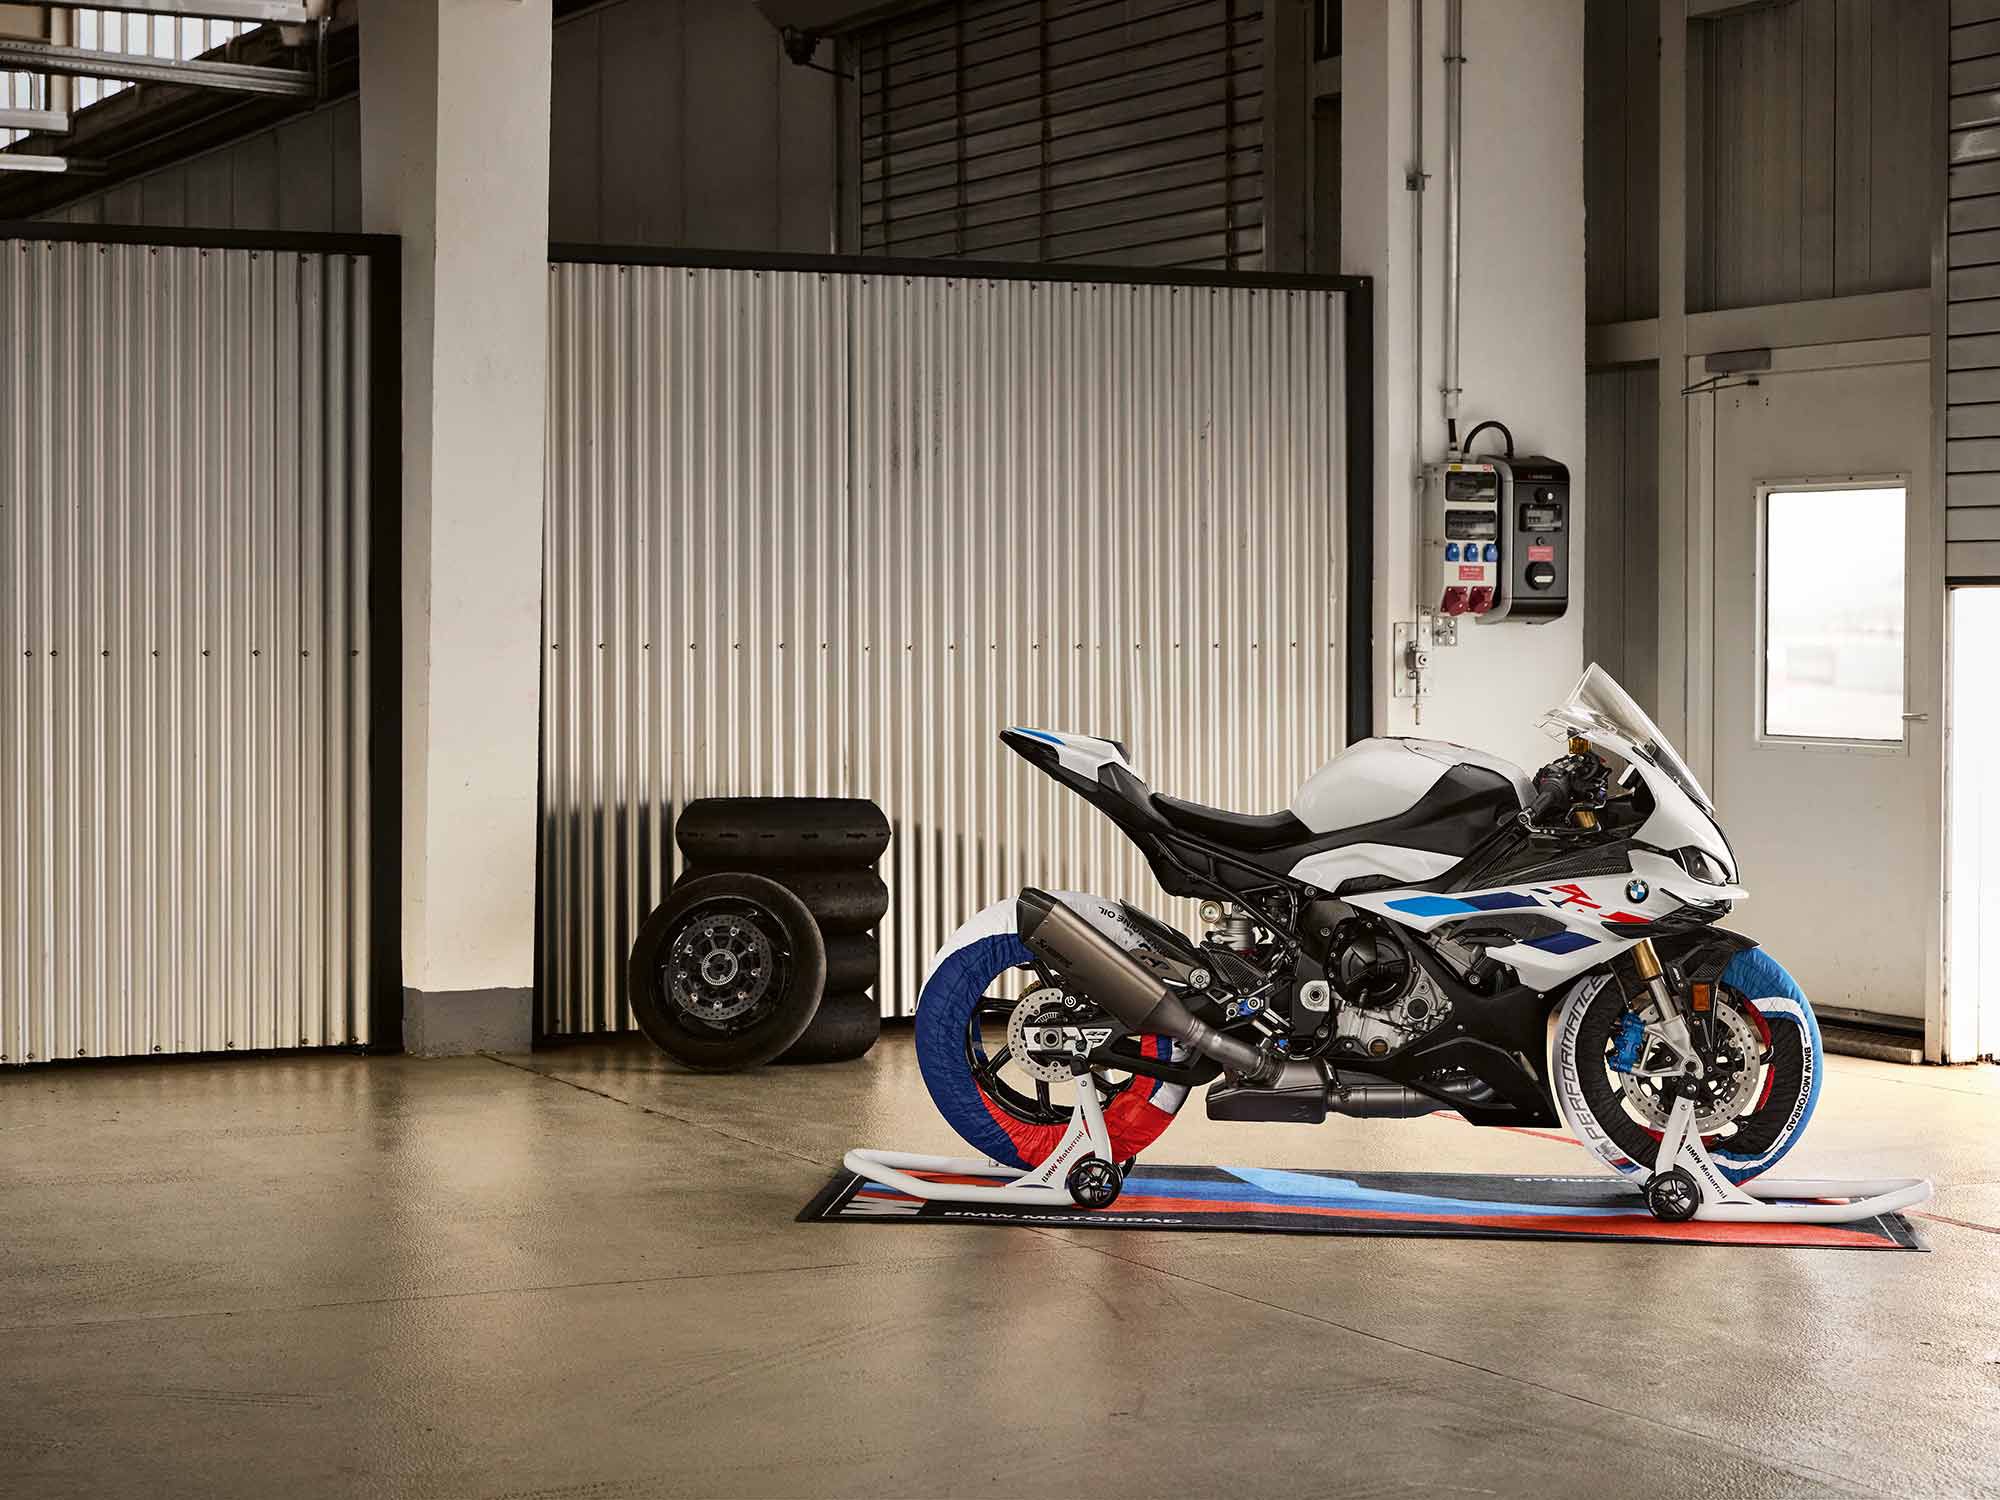 We can’t wait to see what the upgrades have done to the handling and responsiveness of the S 1000 RR.